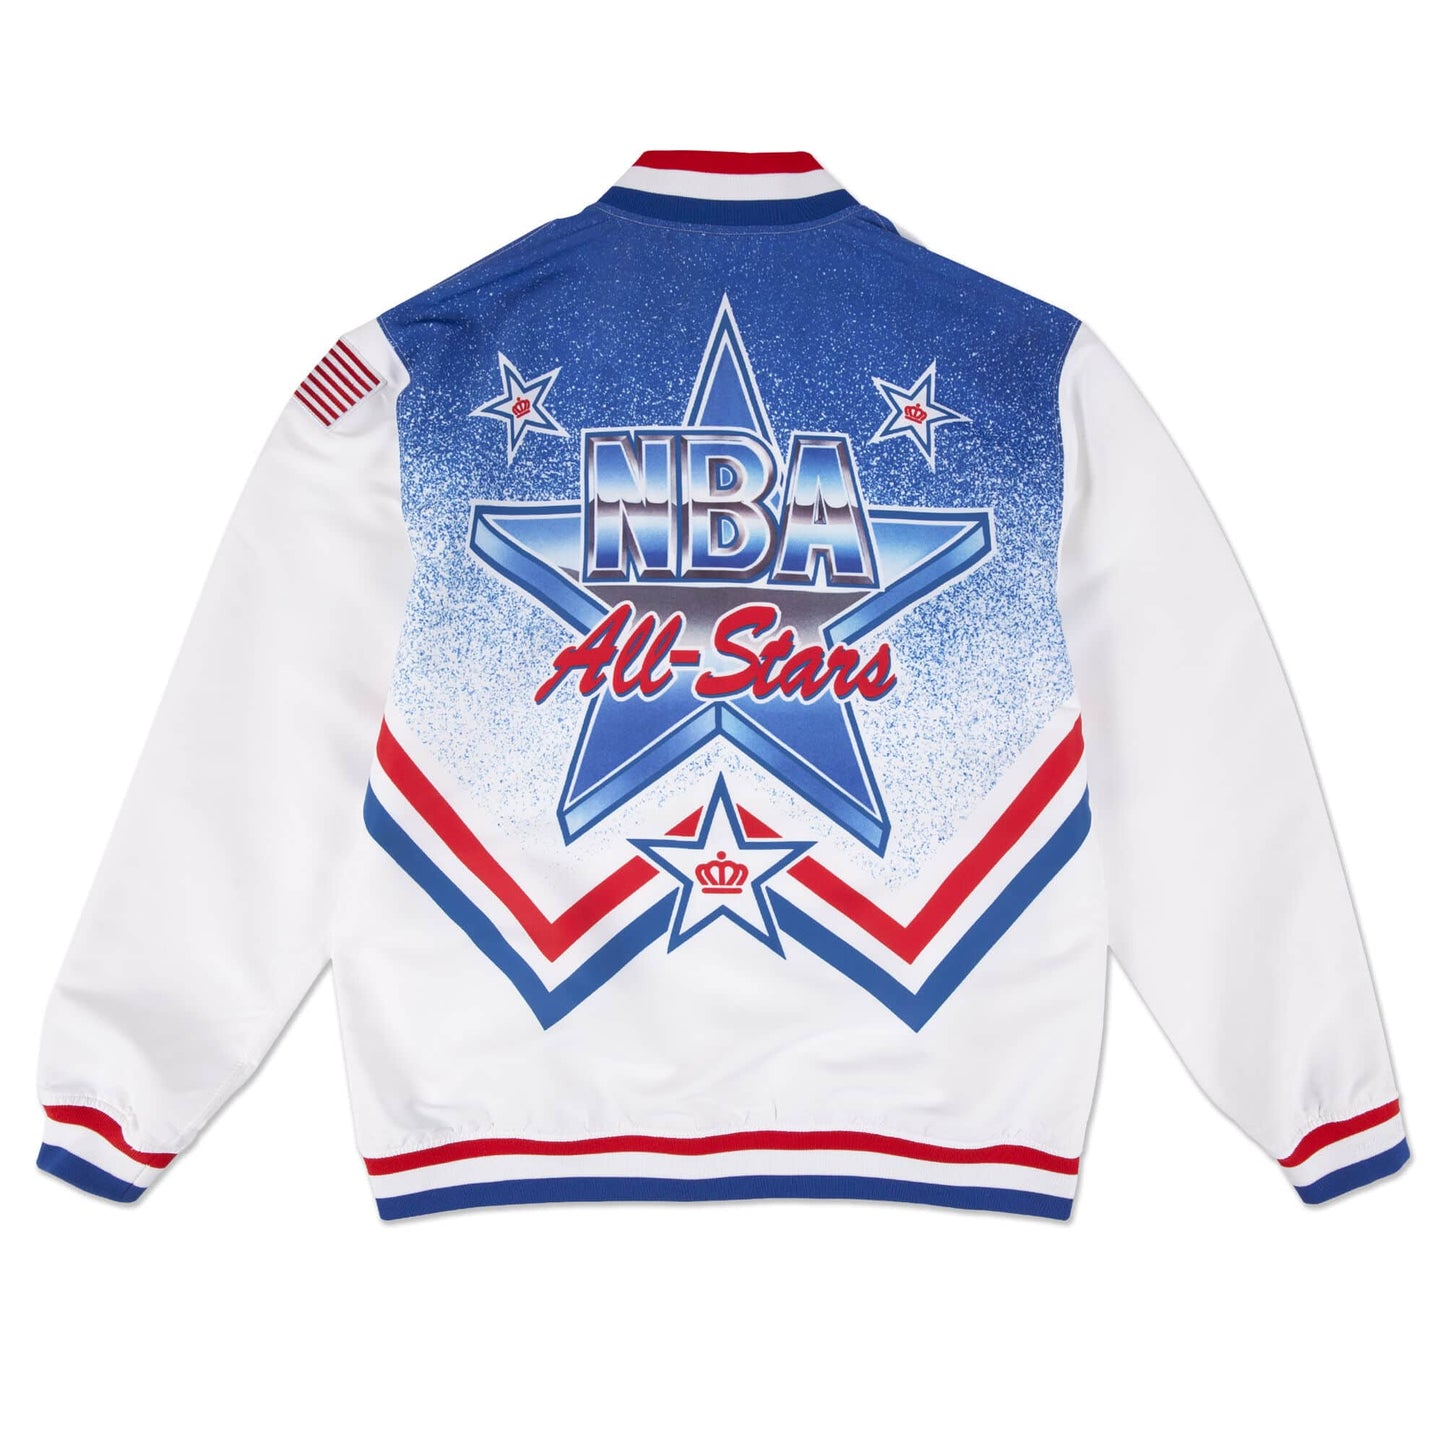 Authentic Warm Up Jacket All Star East 1991-92